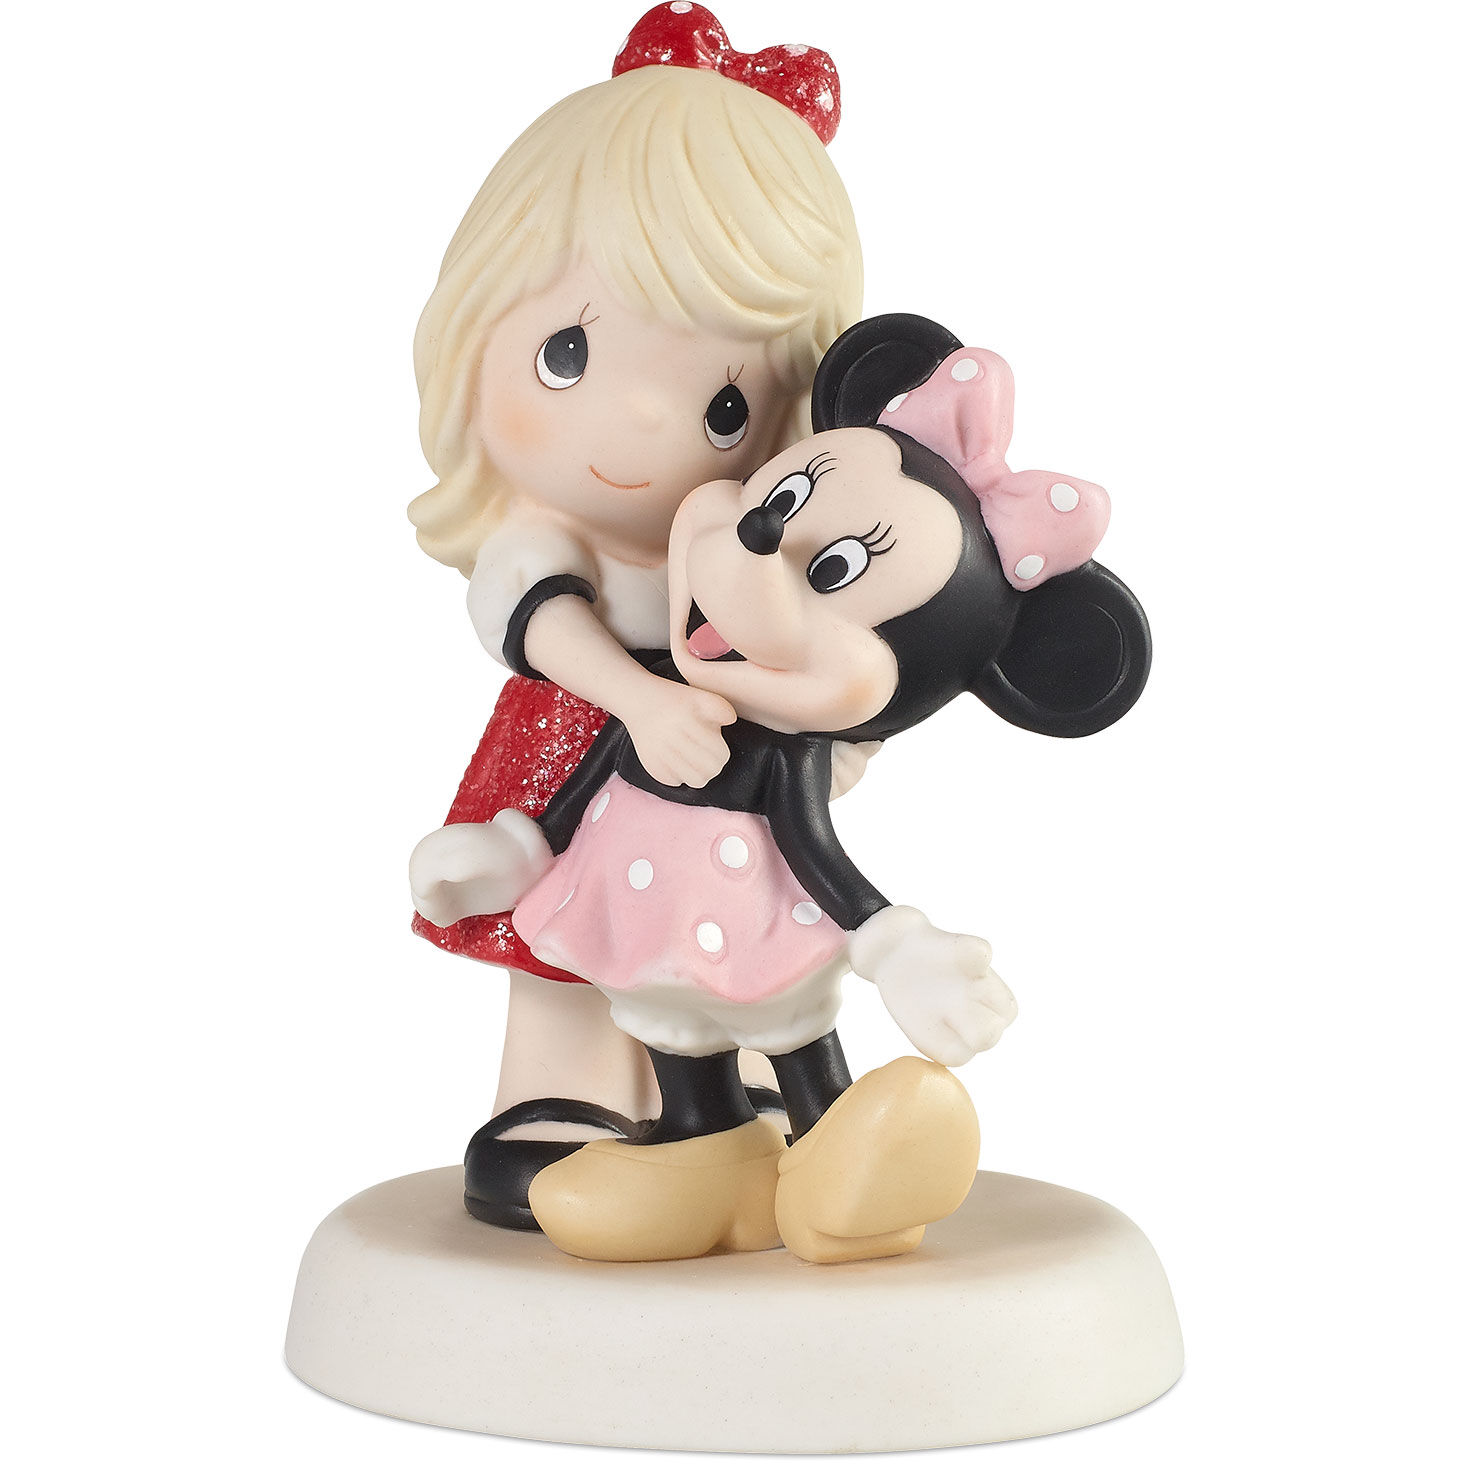 Precious Moments Disney Showcase Oh Gosh Mickey Mouse and Minnie Mouse Bisque Porcelain Figurine 182704